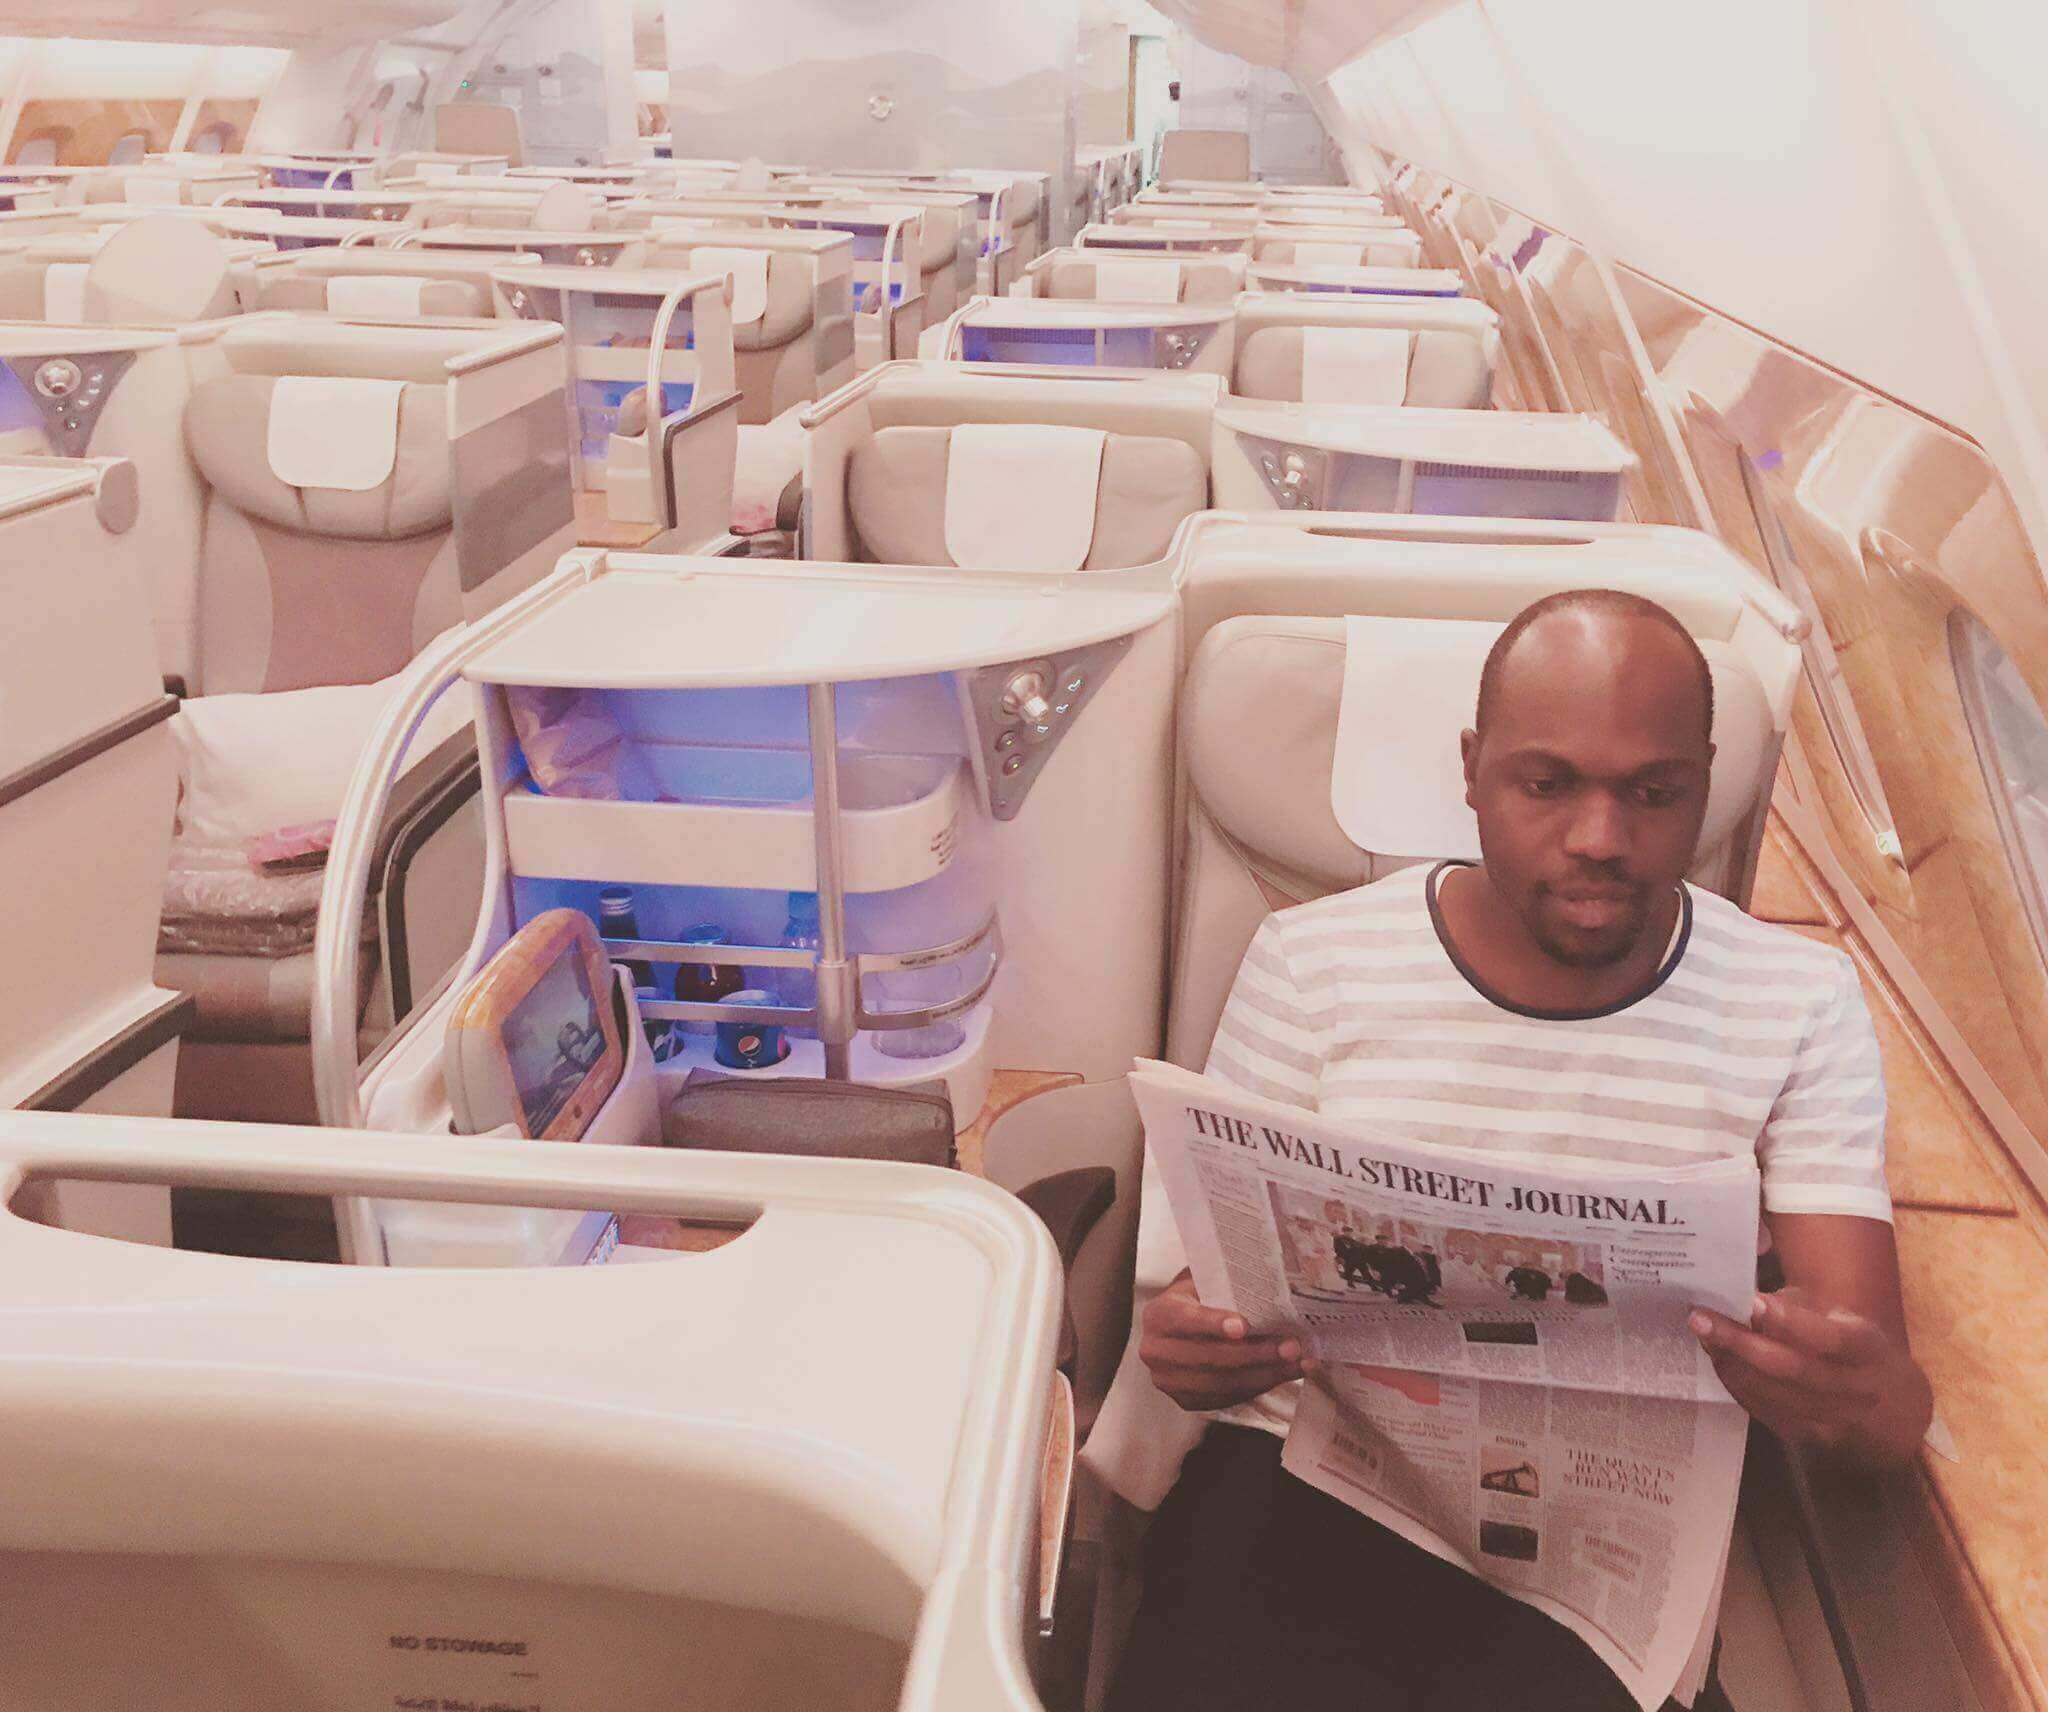 Larry Madowo reveals how Nation editor makes him work regardless of where he's in the world or what he's doing